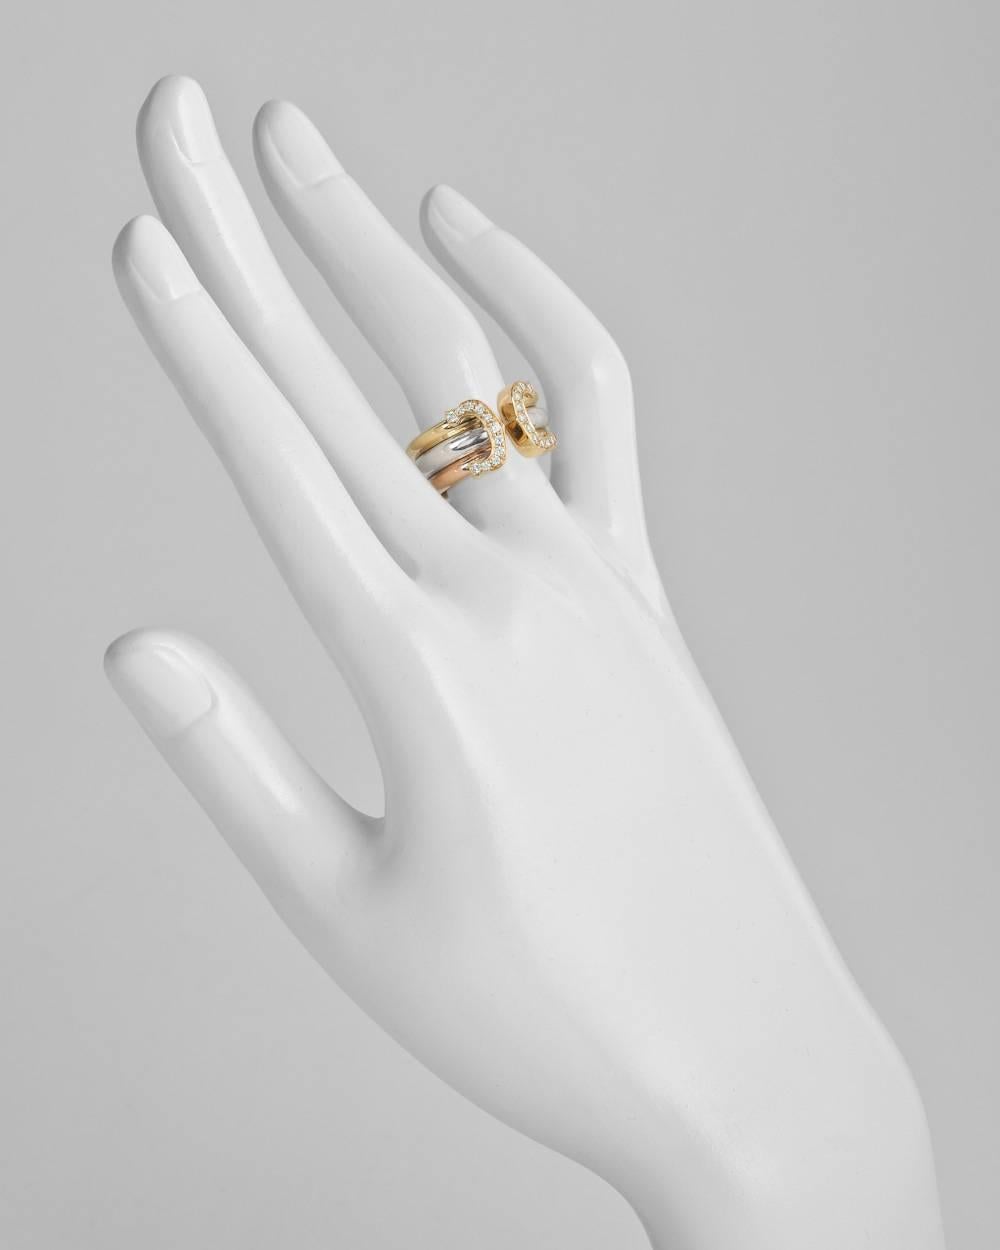 Open double 'C' logo band ring in polished 18k yellow, white and rose gold, with diamond-set 'C'-shaped terminals, numbered M52097, signed Cartier, circa 1997. High-grade diamonds weighing approximately 0.23 total carats. Size 5.25 (50 - European).